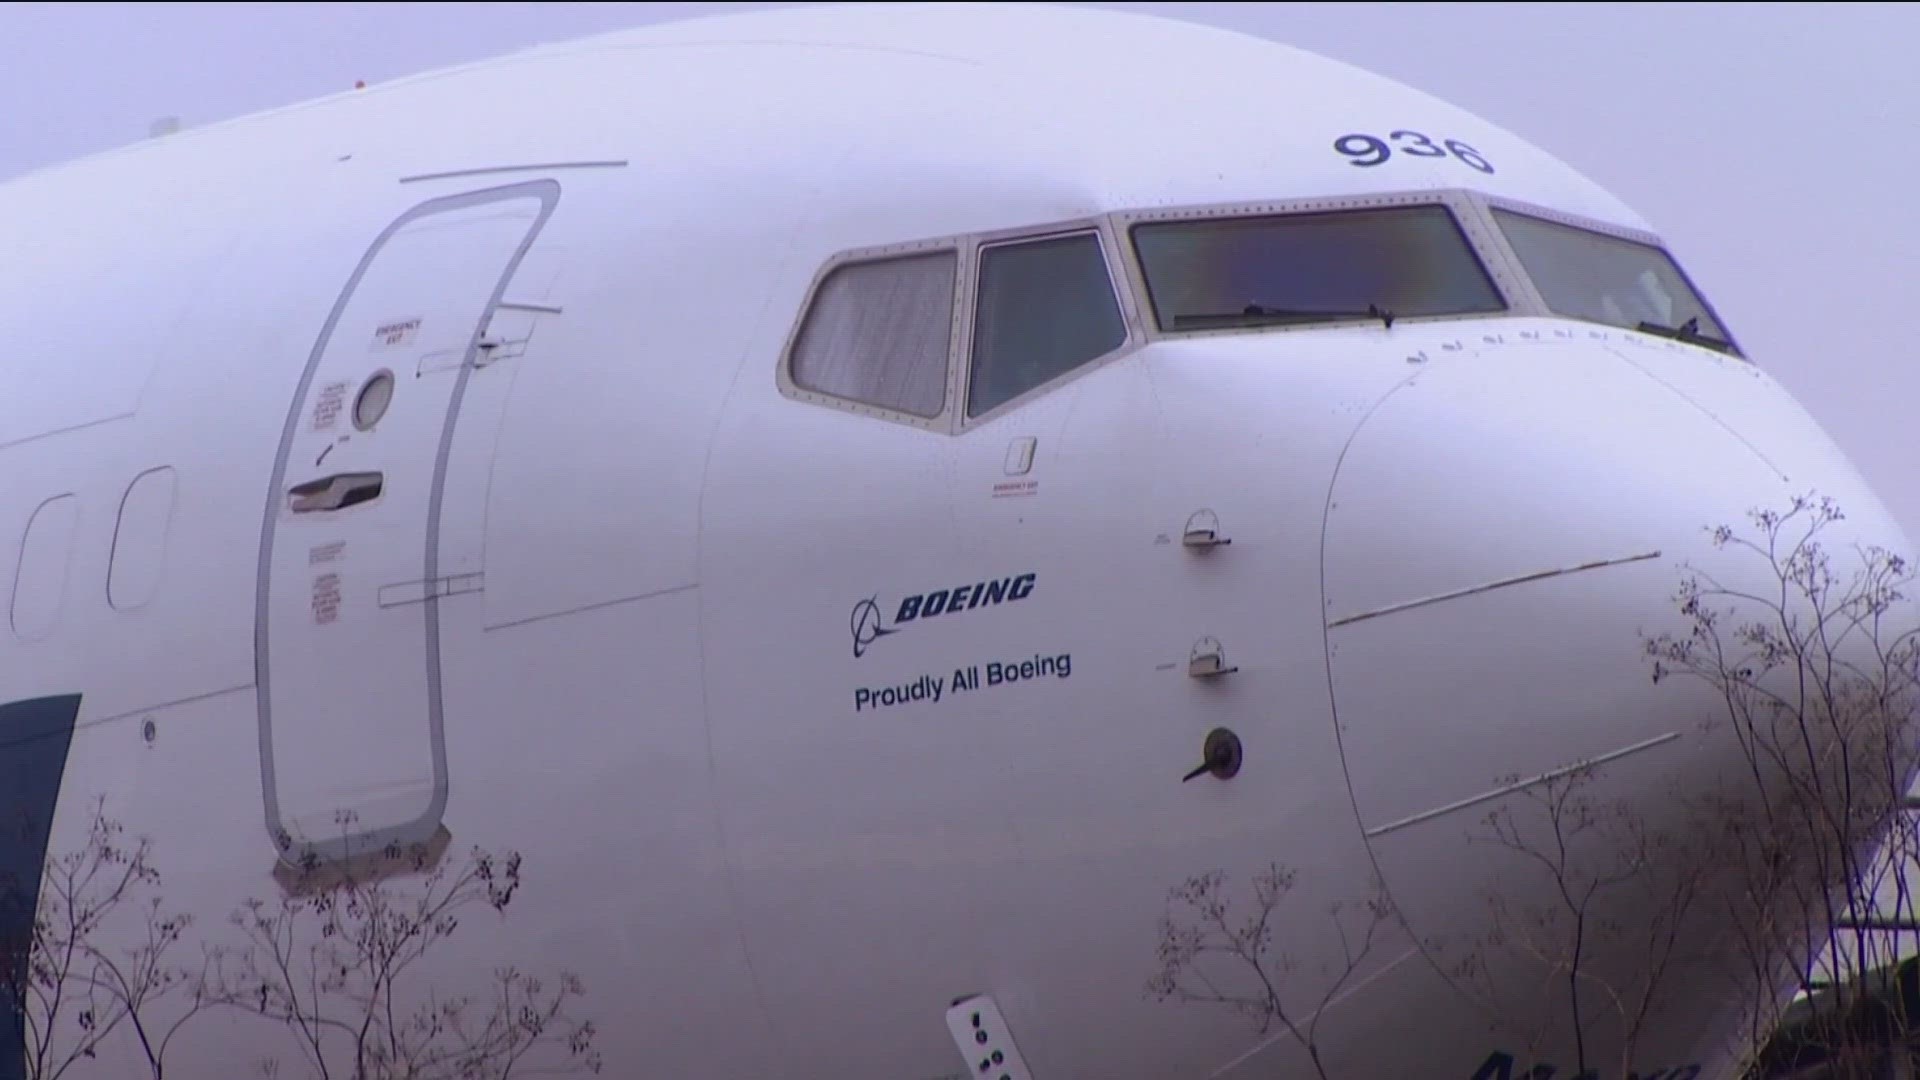 FAA will audit Boeing's aircraft production, increase oversight | kgw.com